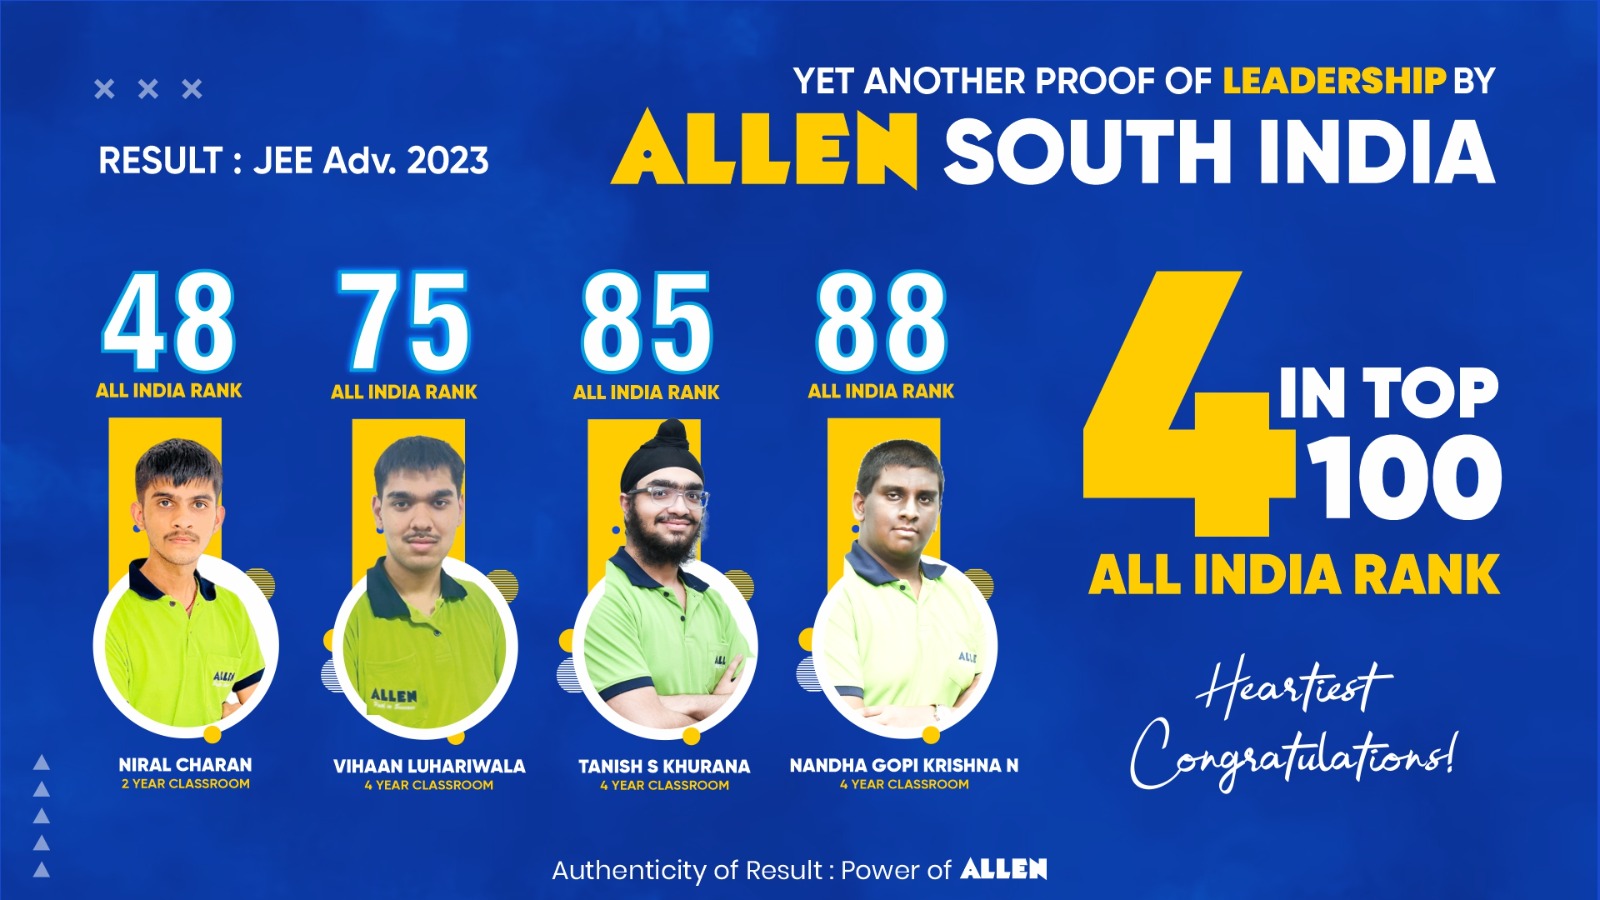 ALLEN Shines in JEE Advanced 2023 Result 4 Students from South India in Top 100 India